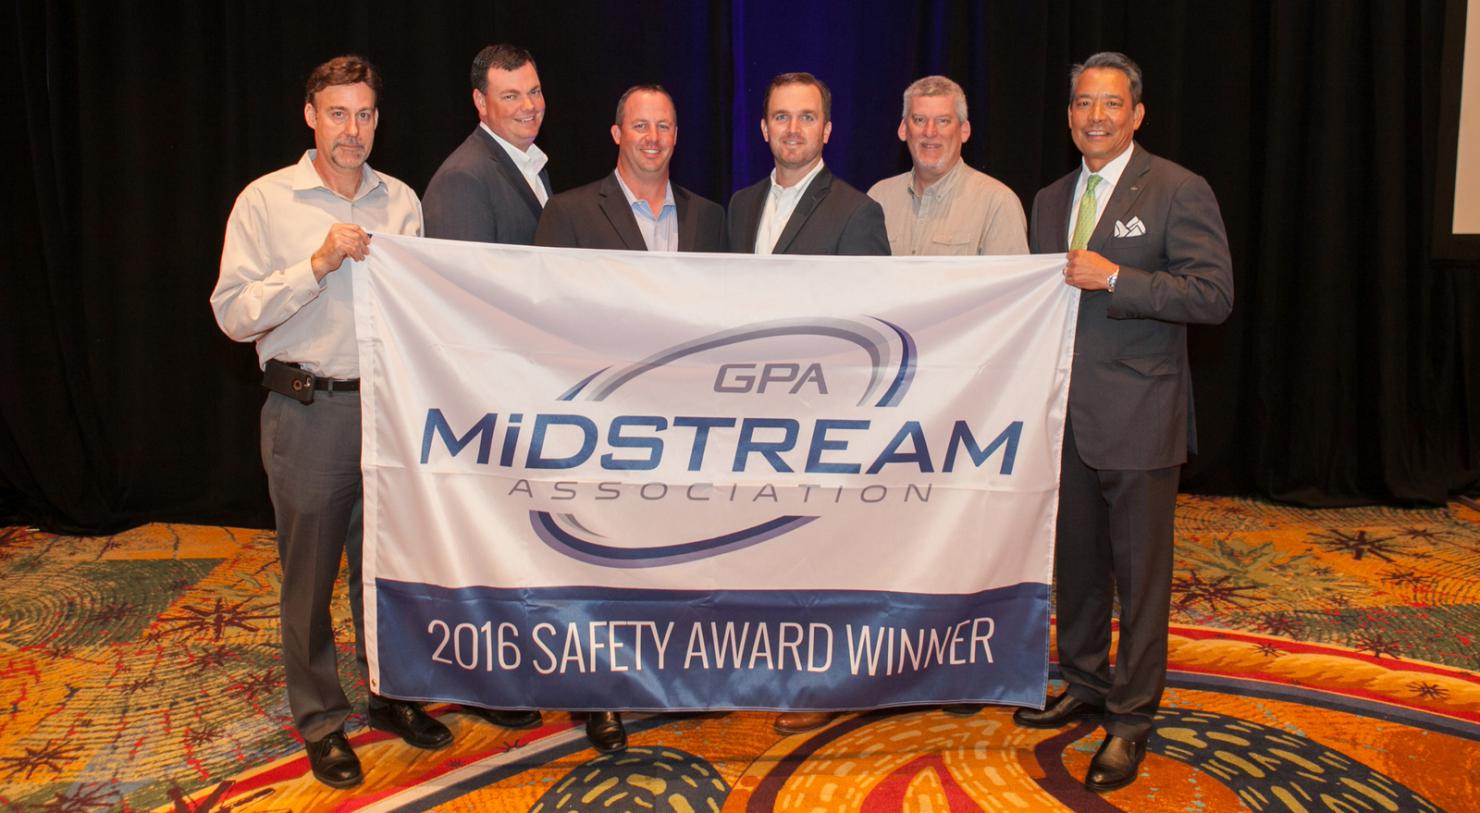 Momentum received two highly coveted GPA Midstream Association safety awards in 2016. The Perfect Record Award for no “lost time” accidents, and the Division II Company Safety Award for outstanding safety performance. This was the second time the Momentum companies have been selected as an award winner.